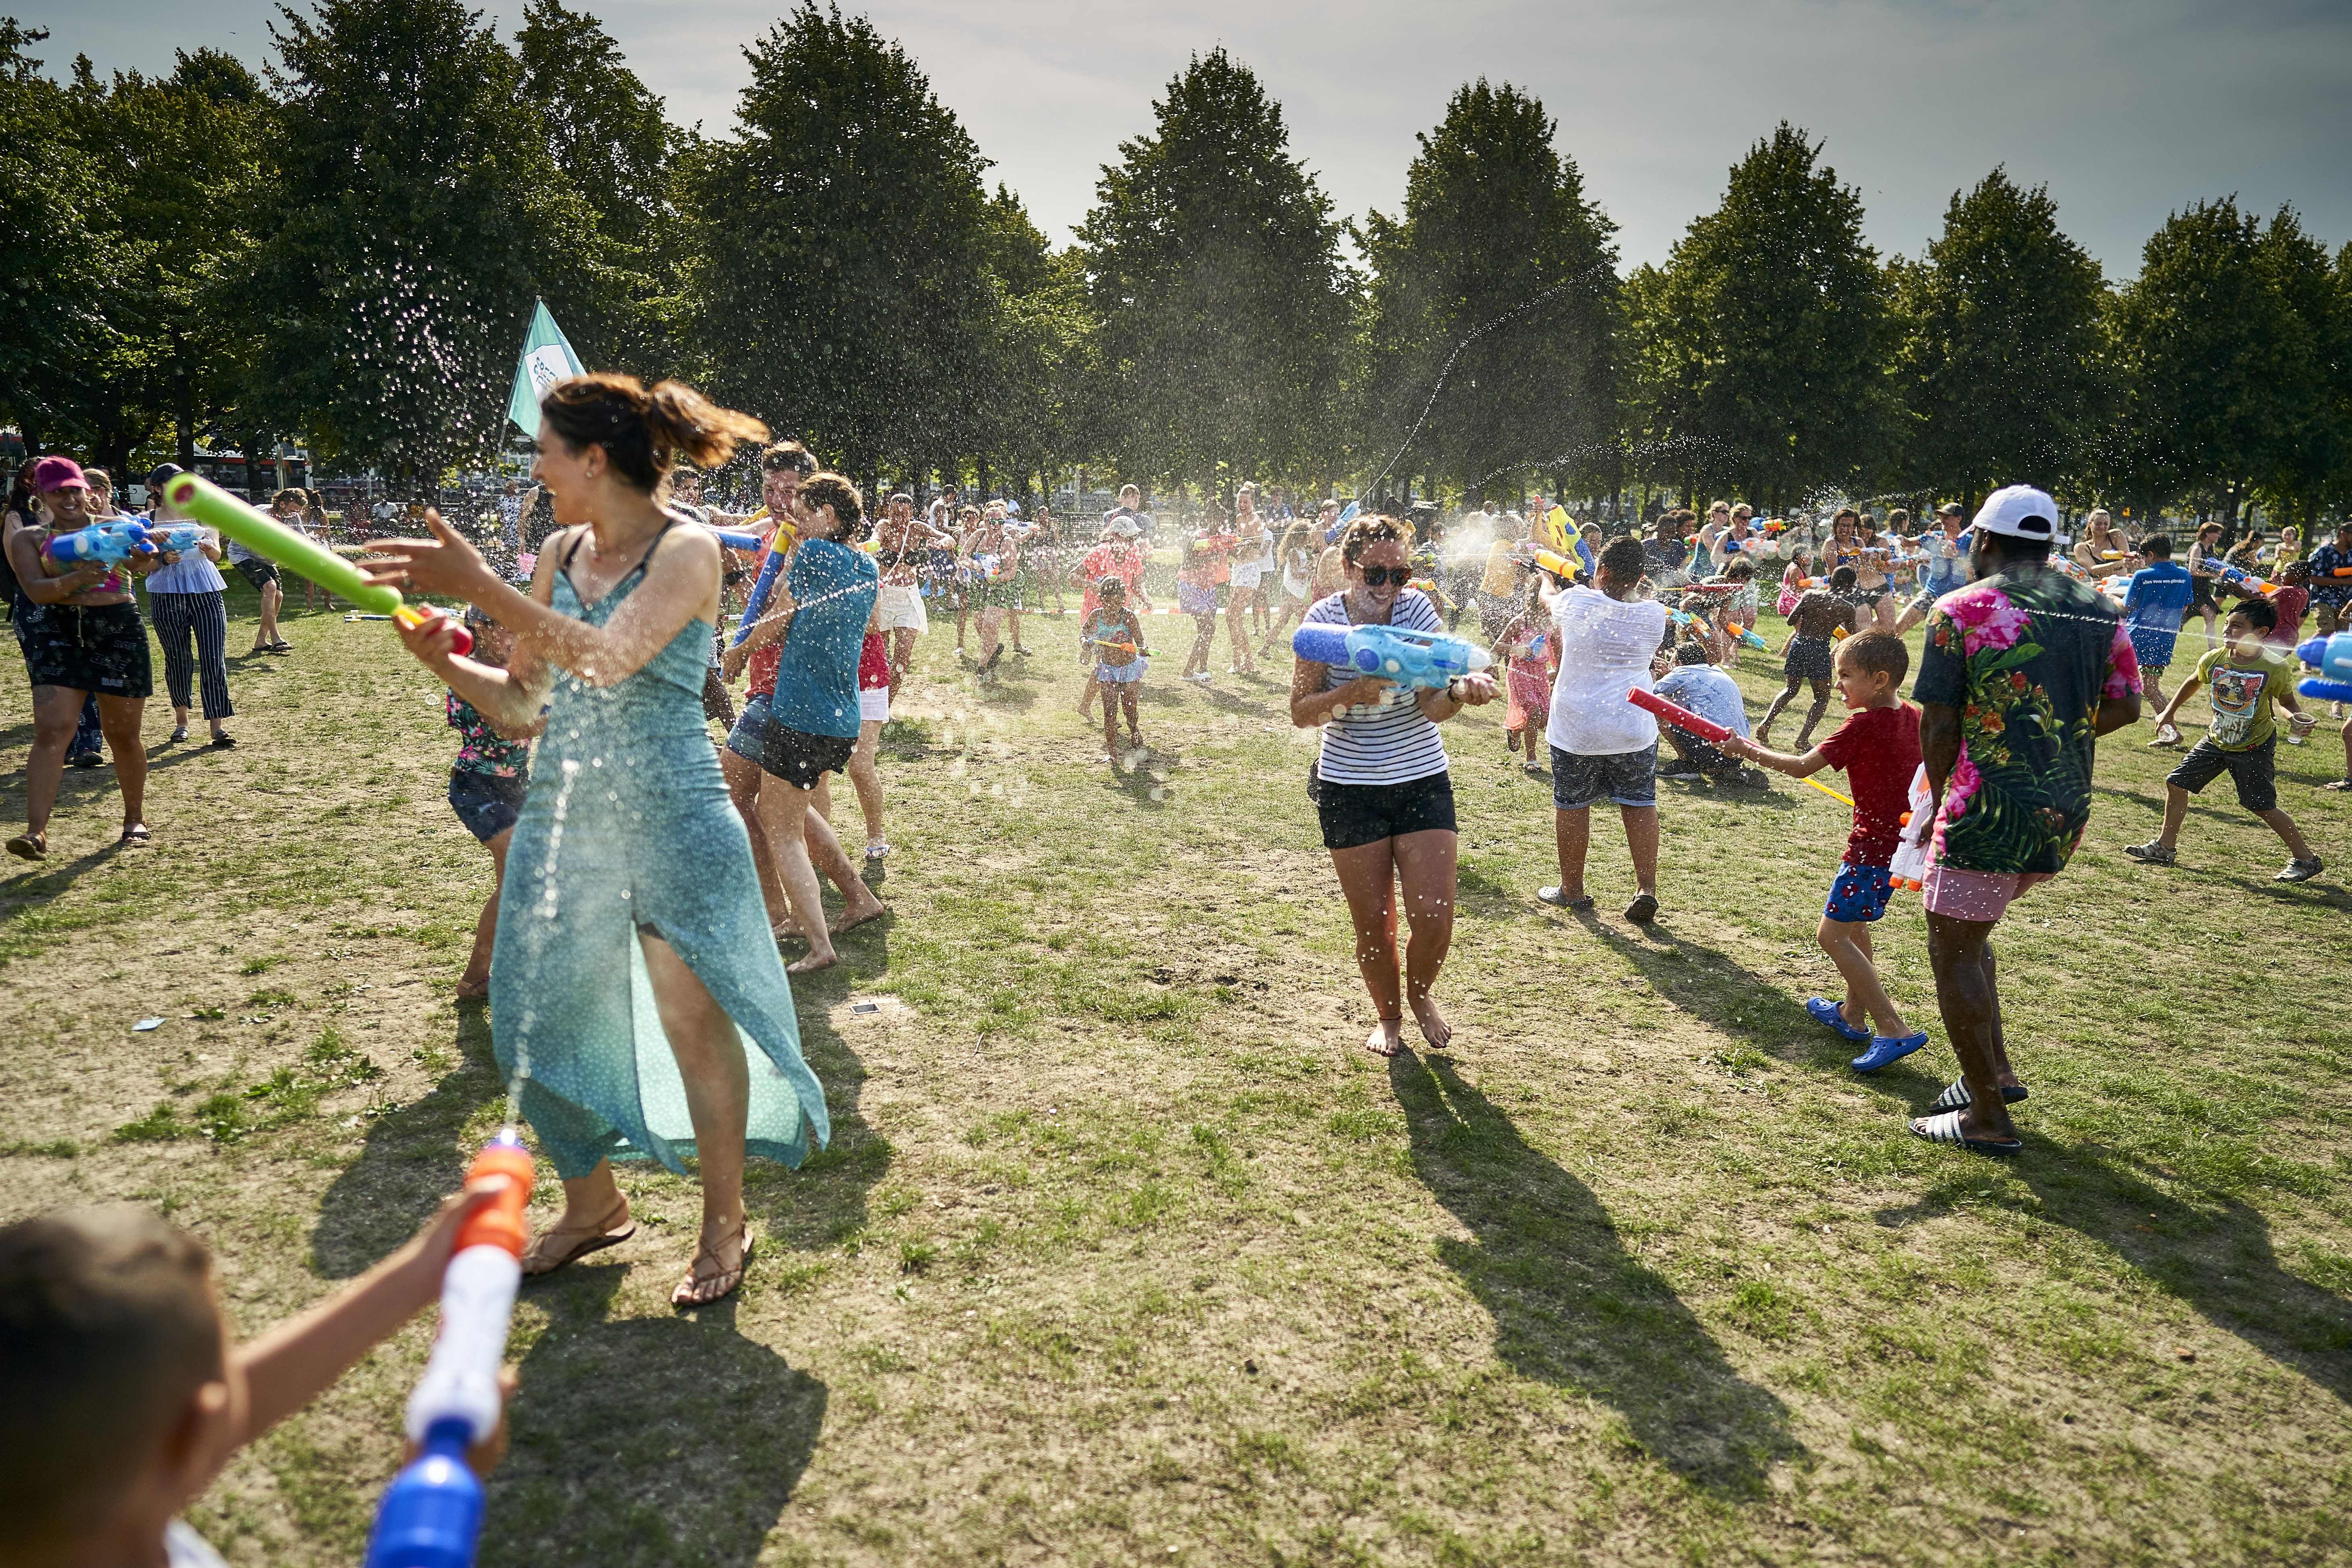 People cool off as they enjoy a water fight on the Malieveld, in The Hague city center, on July 24